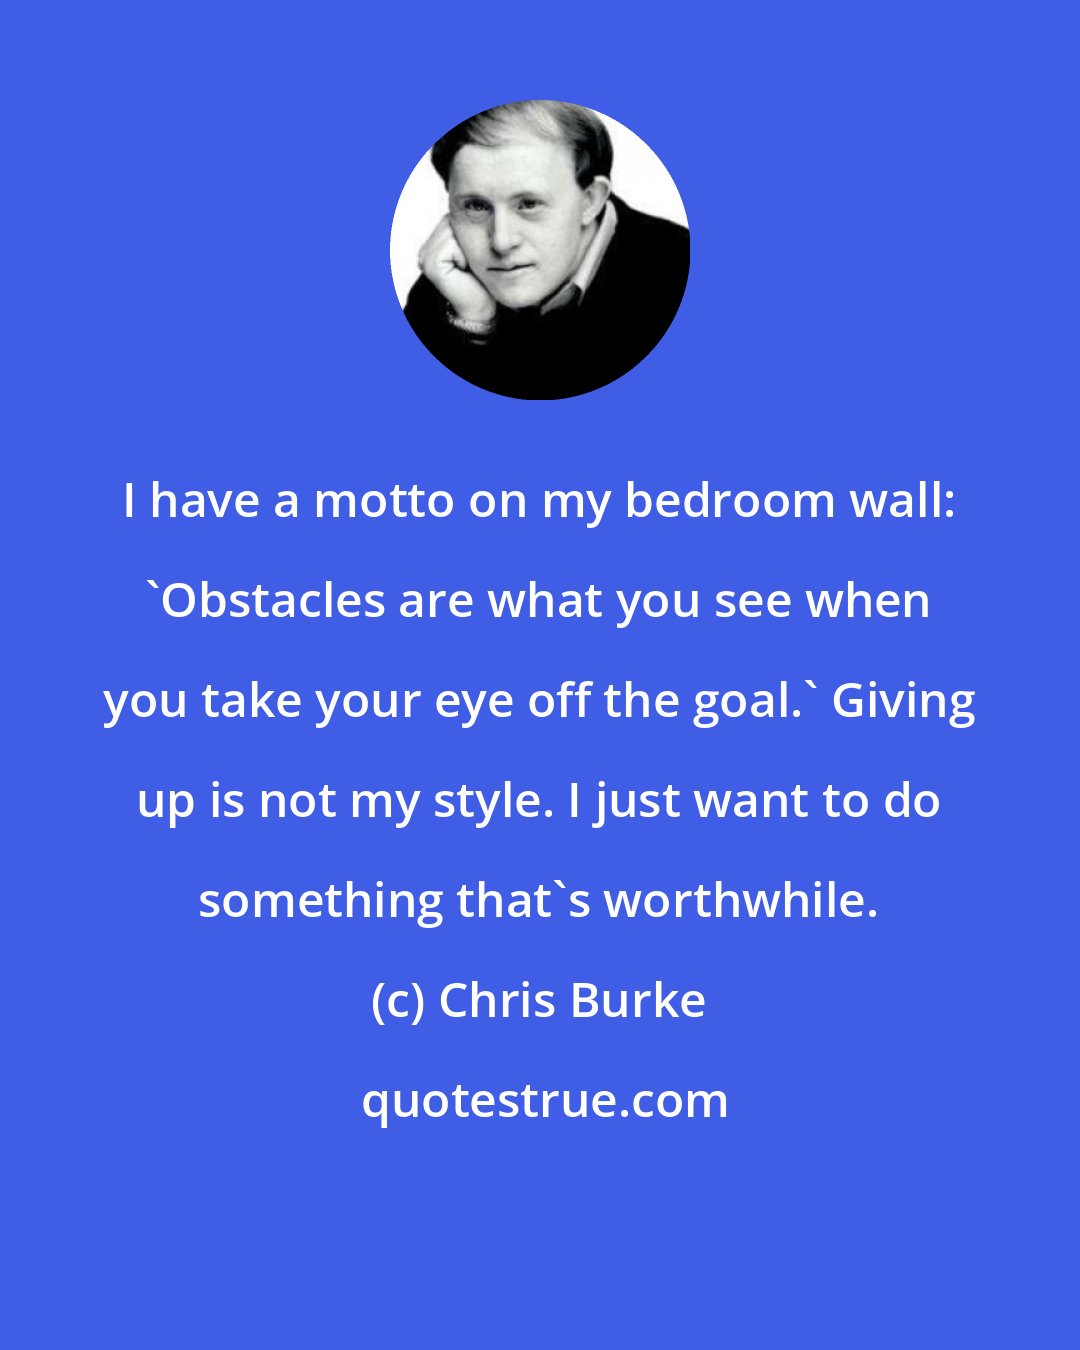 Chris Burke: I have a motto on my bedroom wall: 'Obstacles are what you see when you take your eye off the goal.' Giving up is not my style. I just want to do something that's worthwhile.